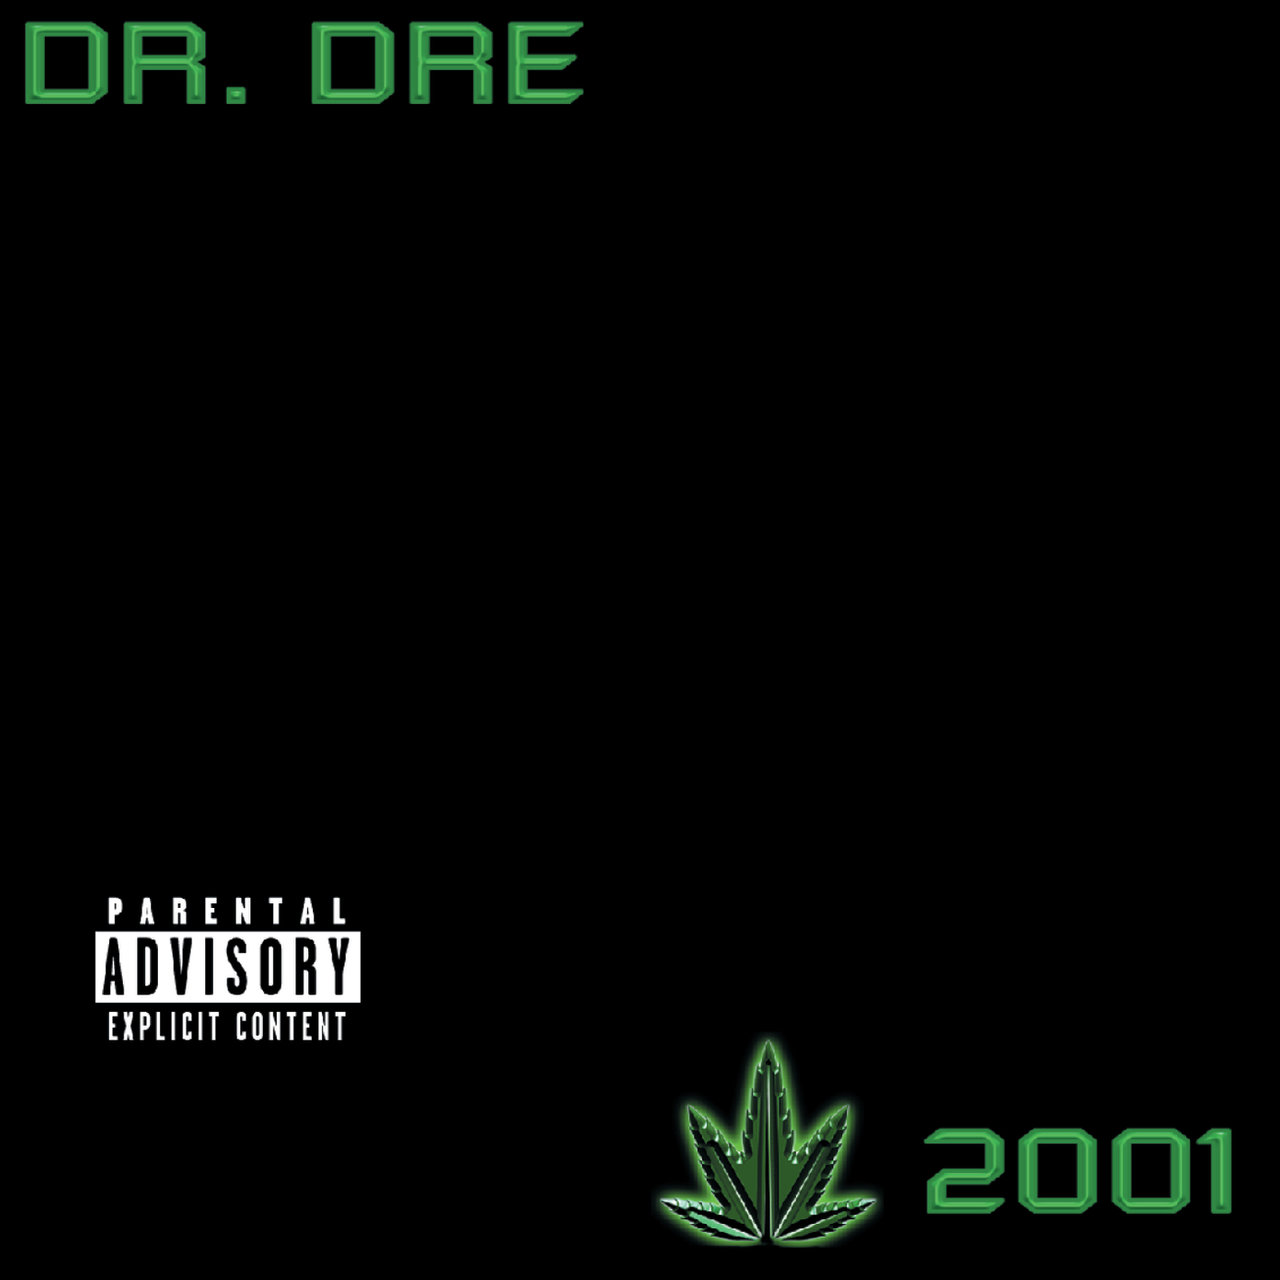 Dr. Dre - 2001 (Cover)